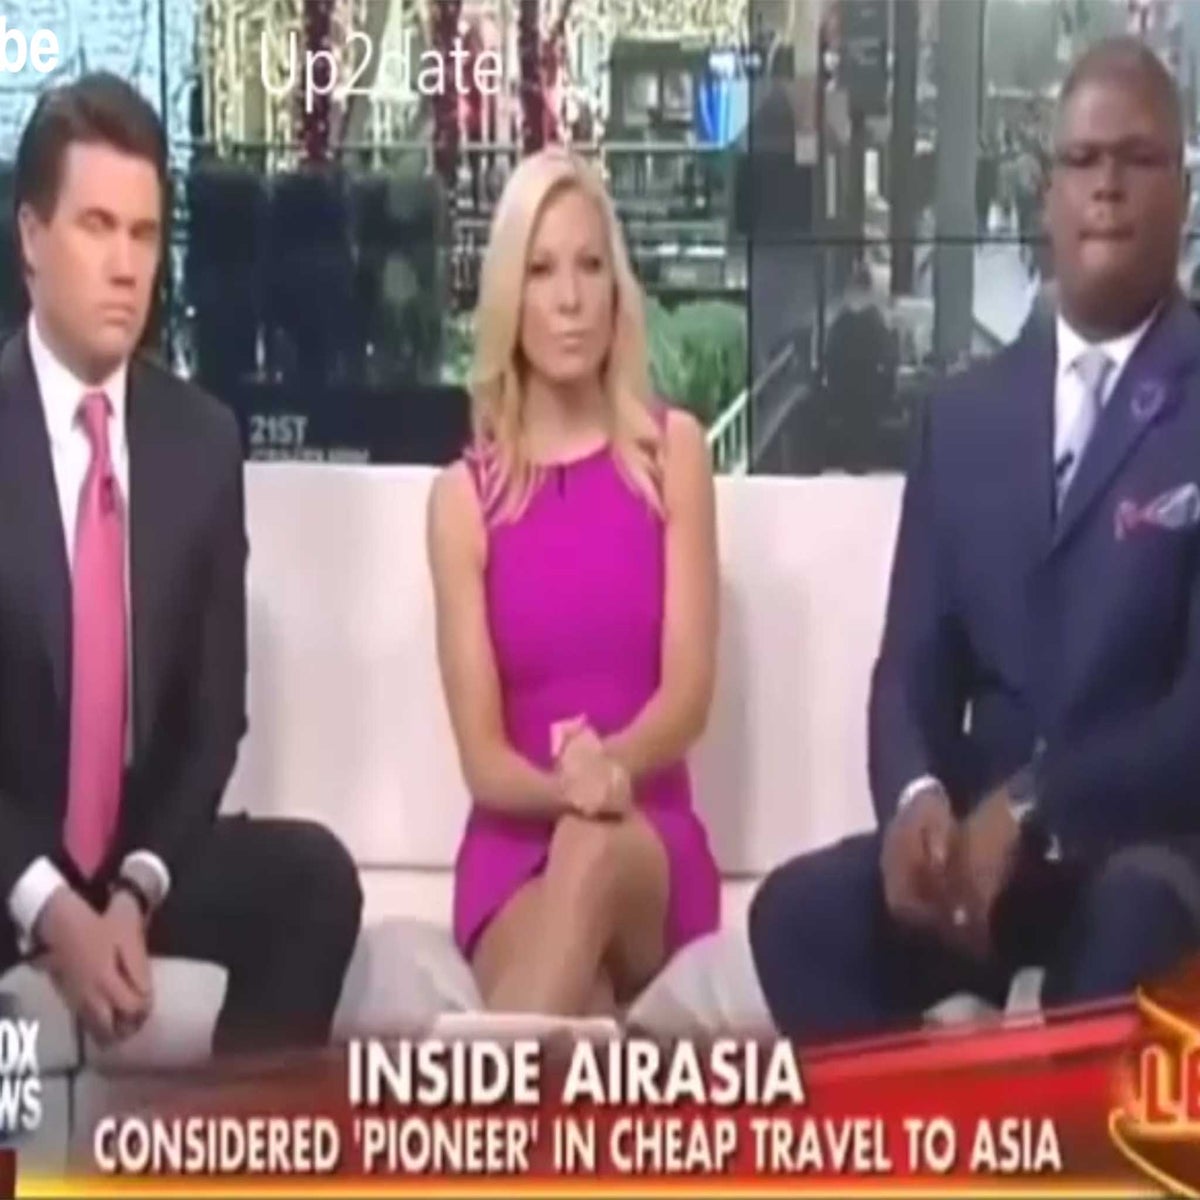 Fox News presenter mocked after appearing to link disappearance